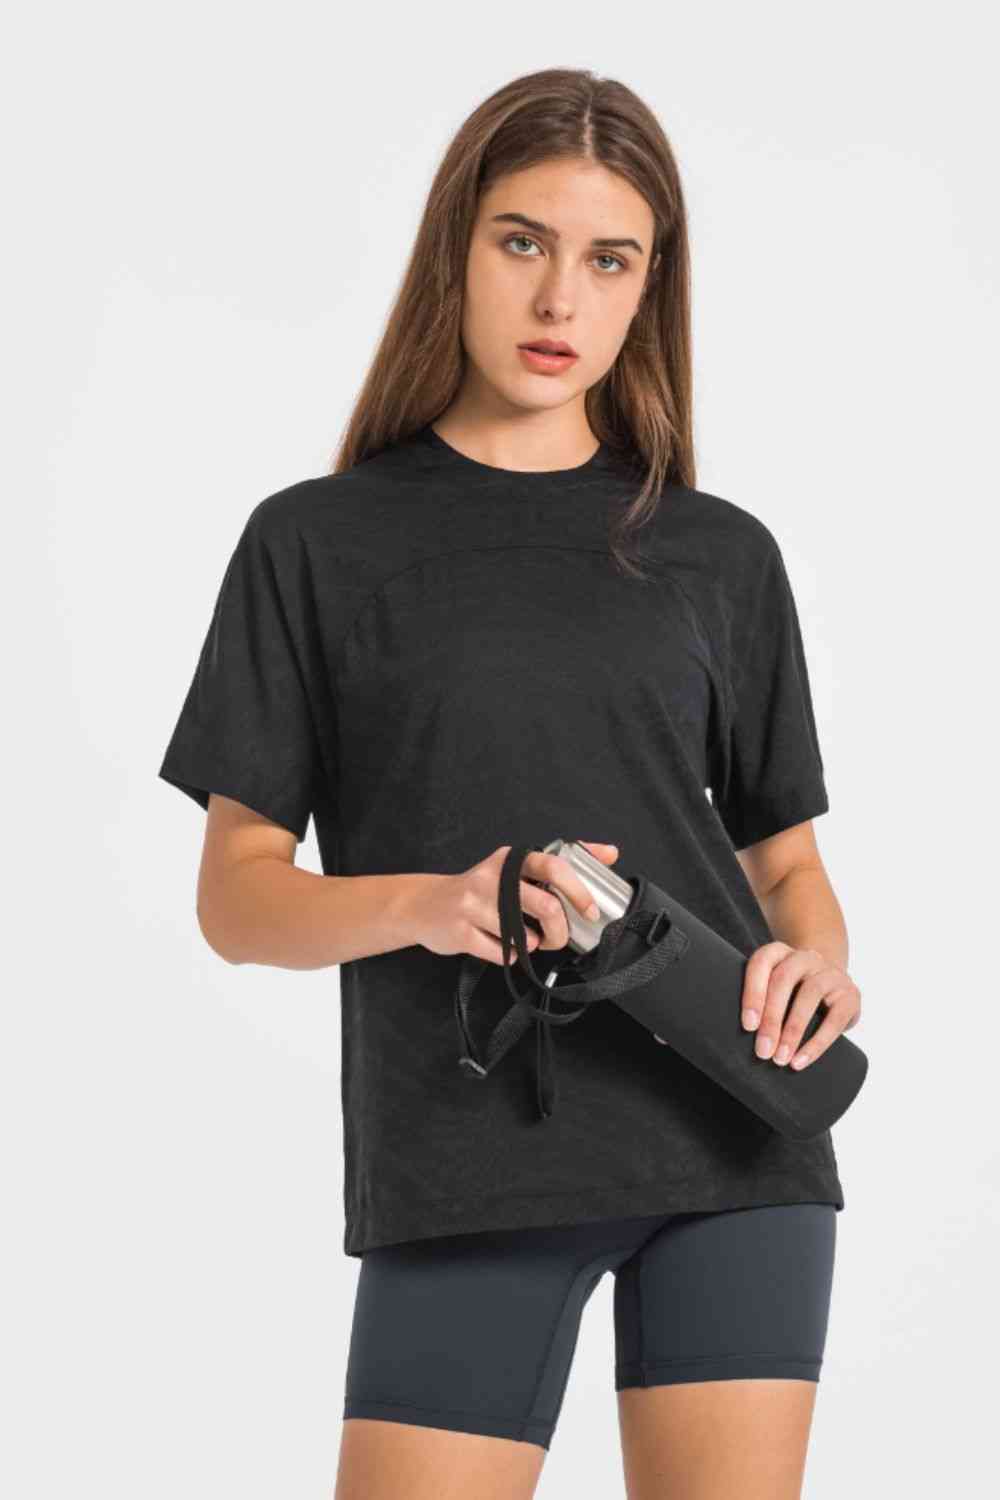 Breathable and Lightweight Short Sleeve Sports Top